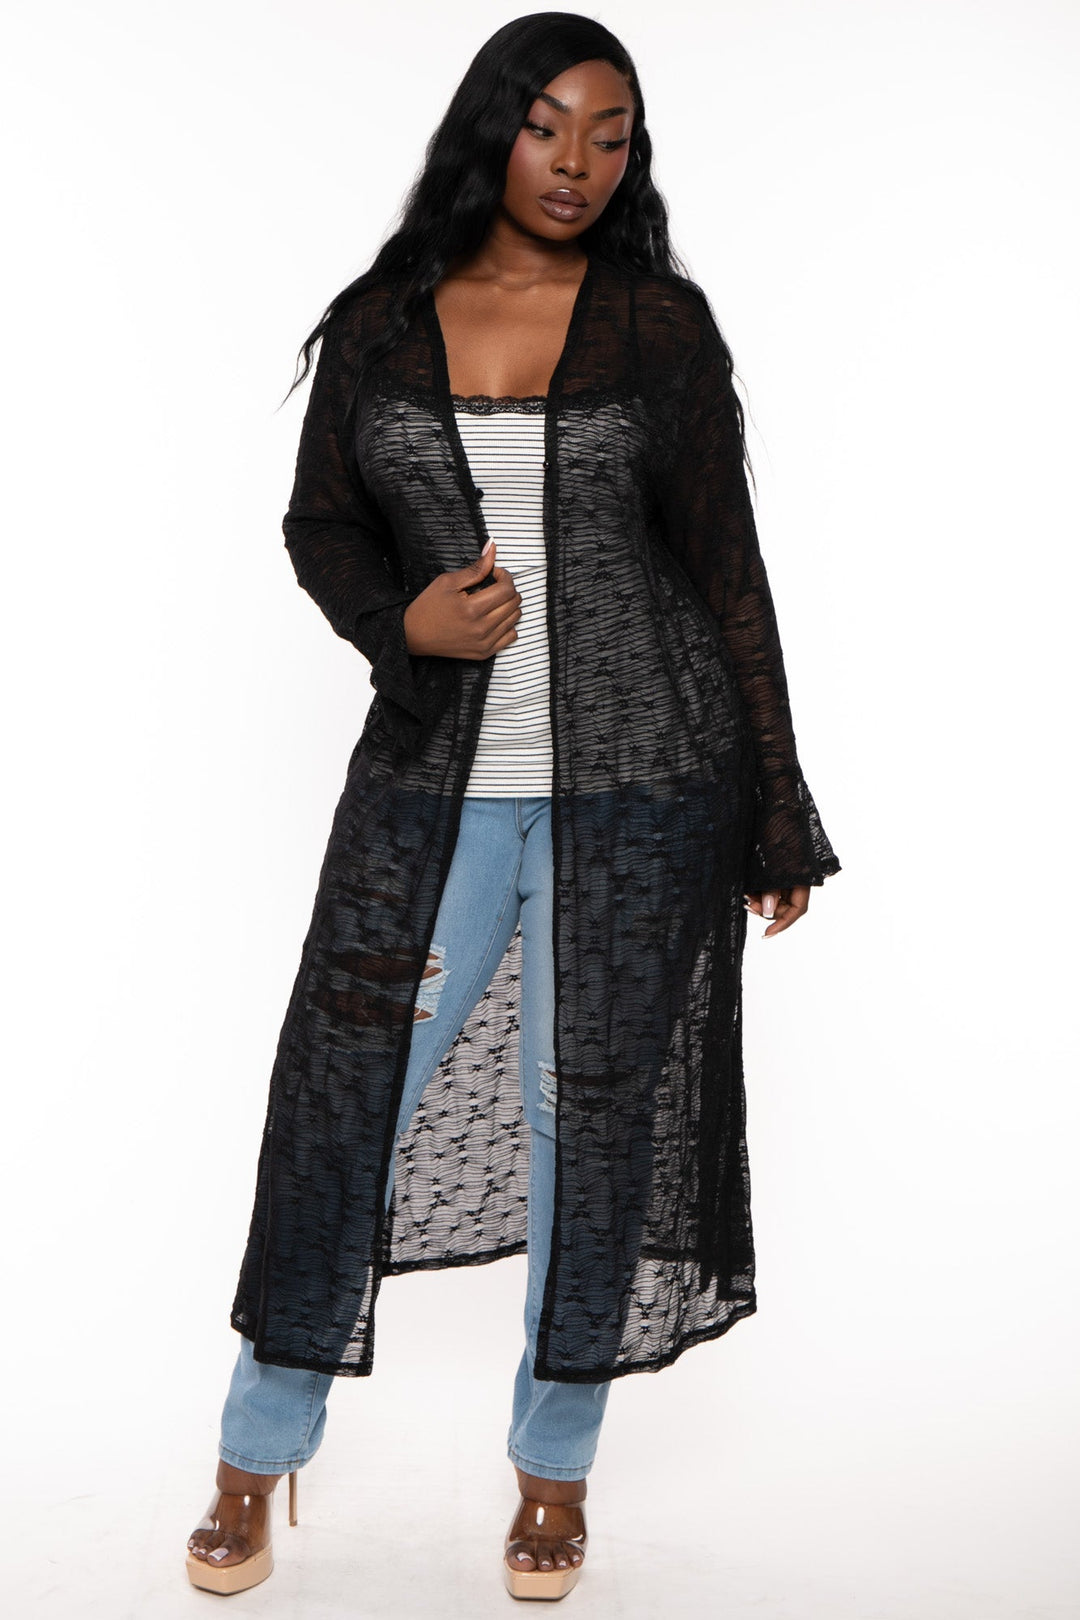 CULTURE CODE Tops Plus Size Scarlet Lace Flare Duster  - Black